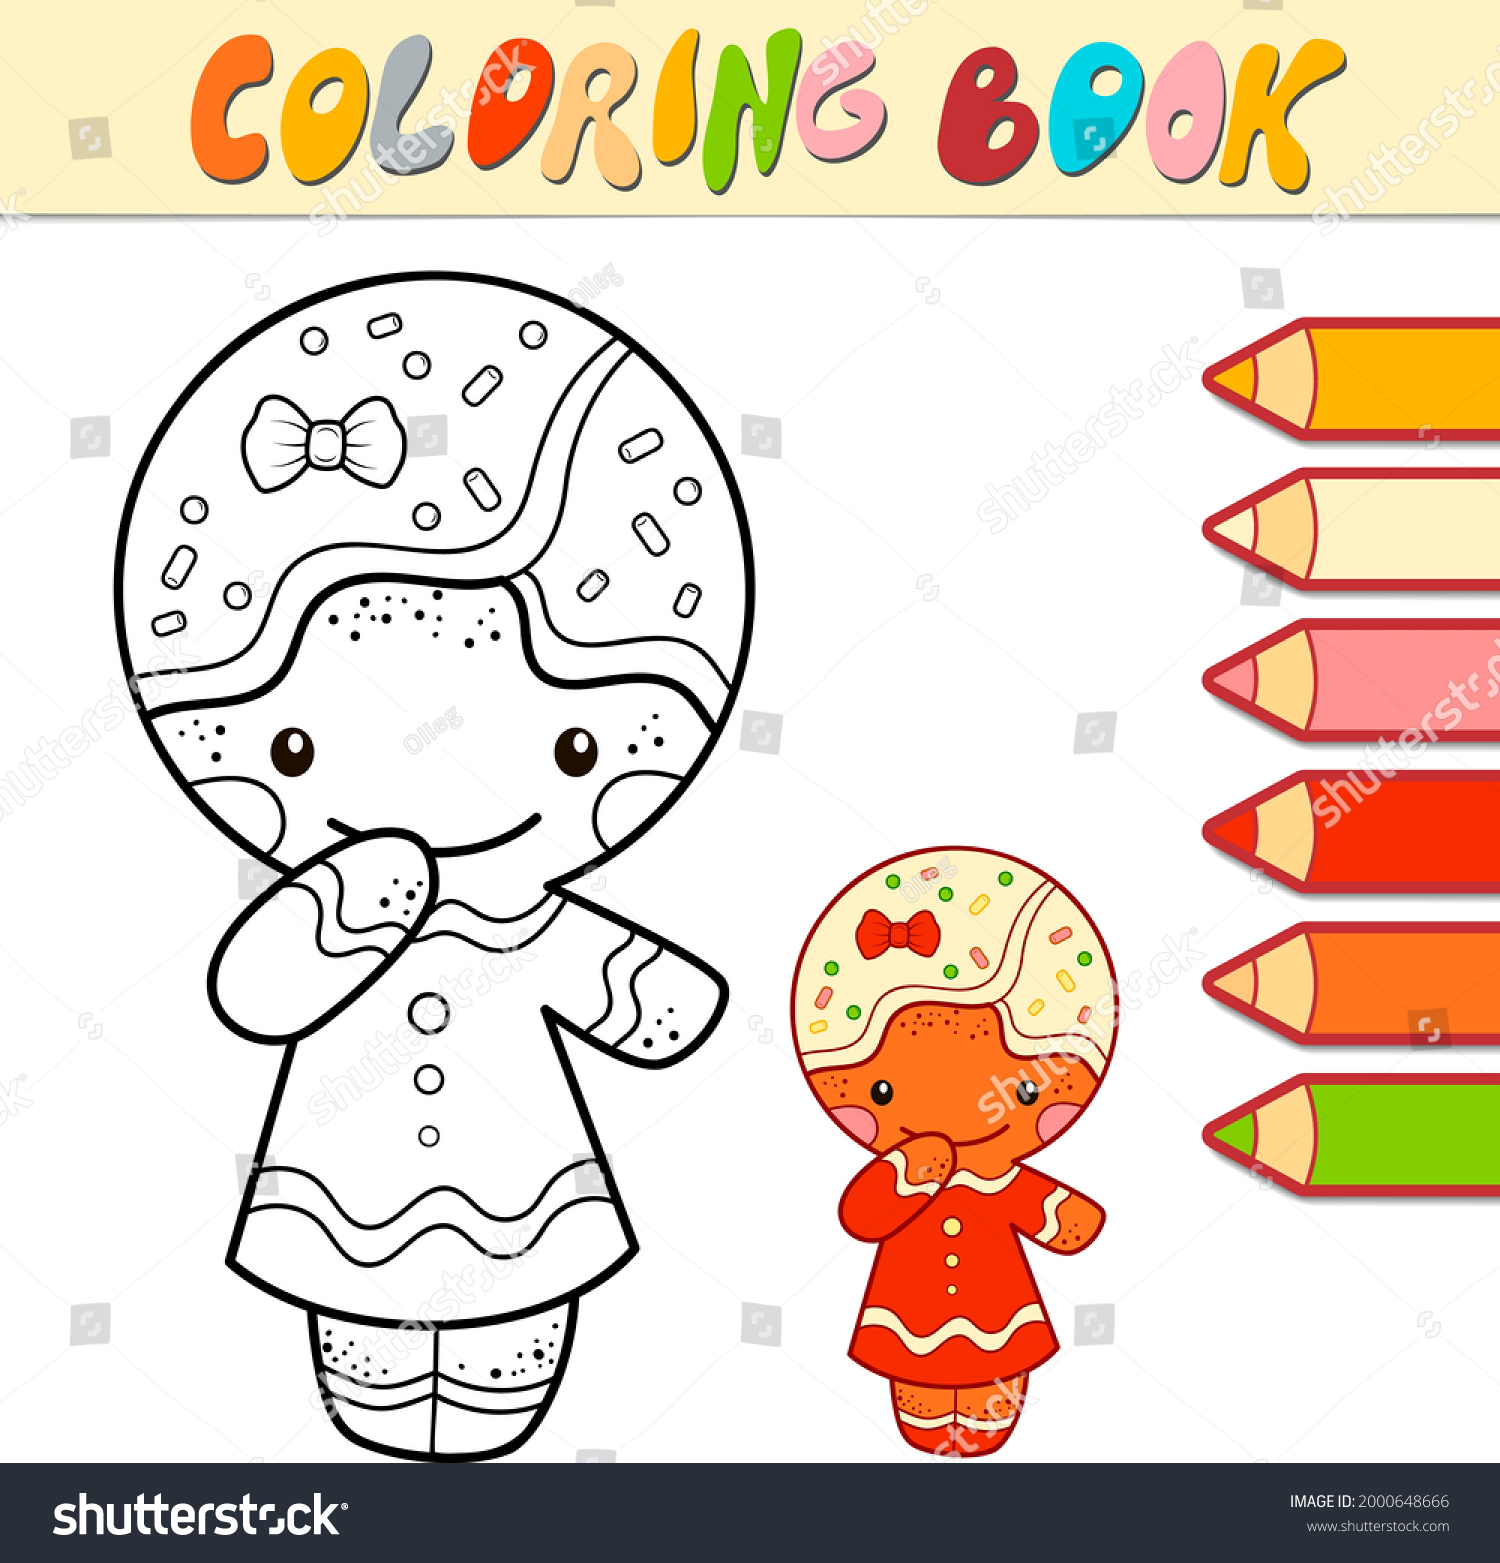 Gingerbread coloring page stock photos and pictures